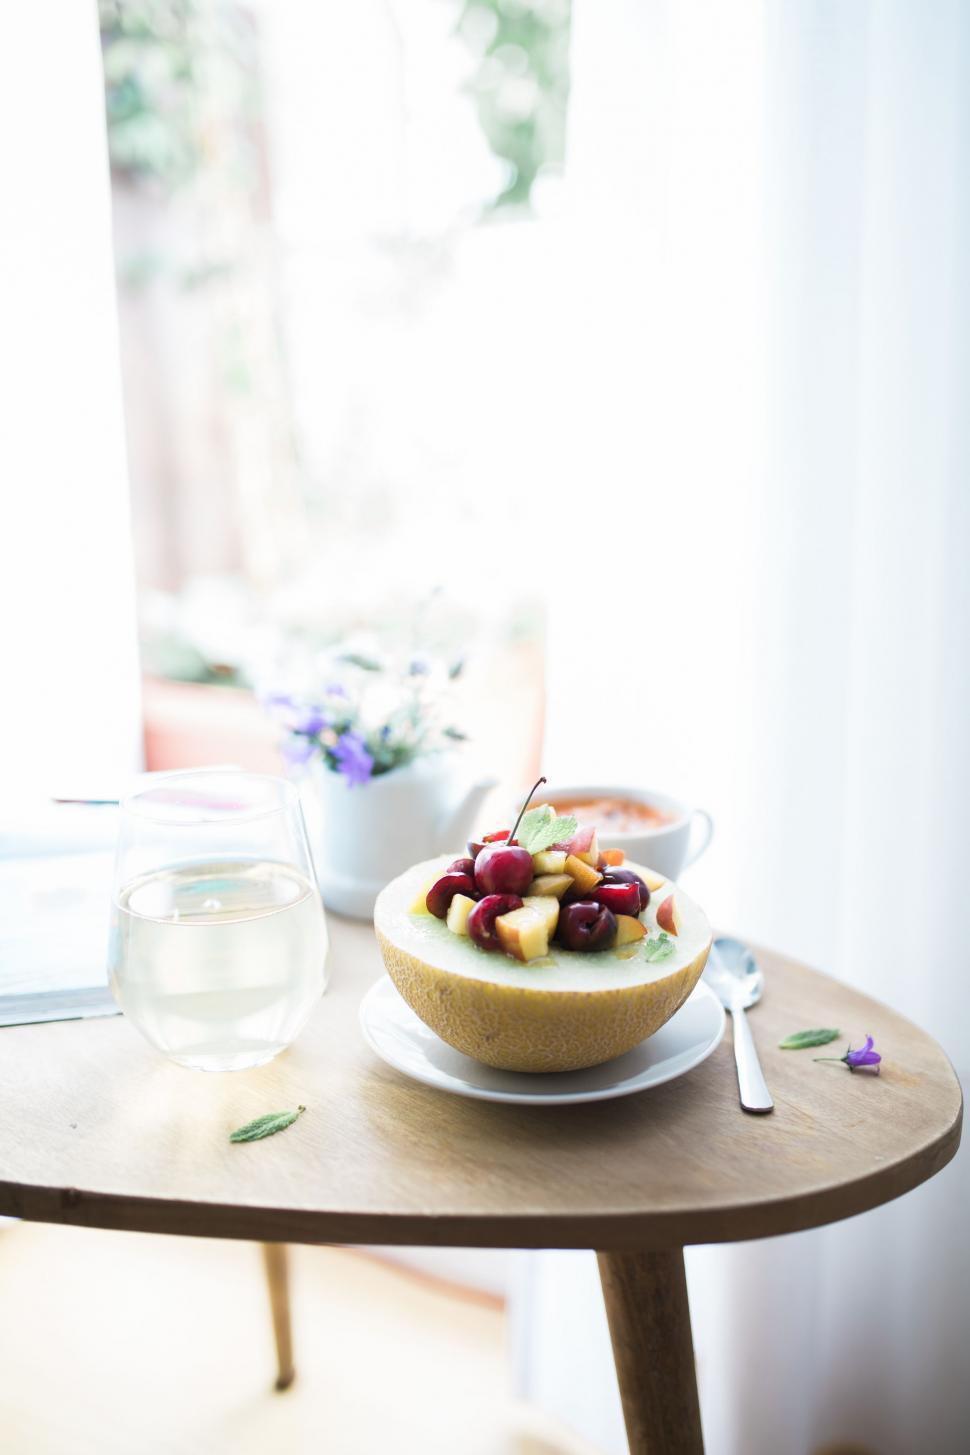 Free Image of Bowl of Fruit and Glass of Water on Table 